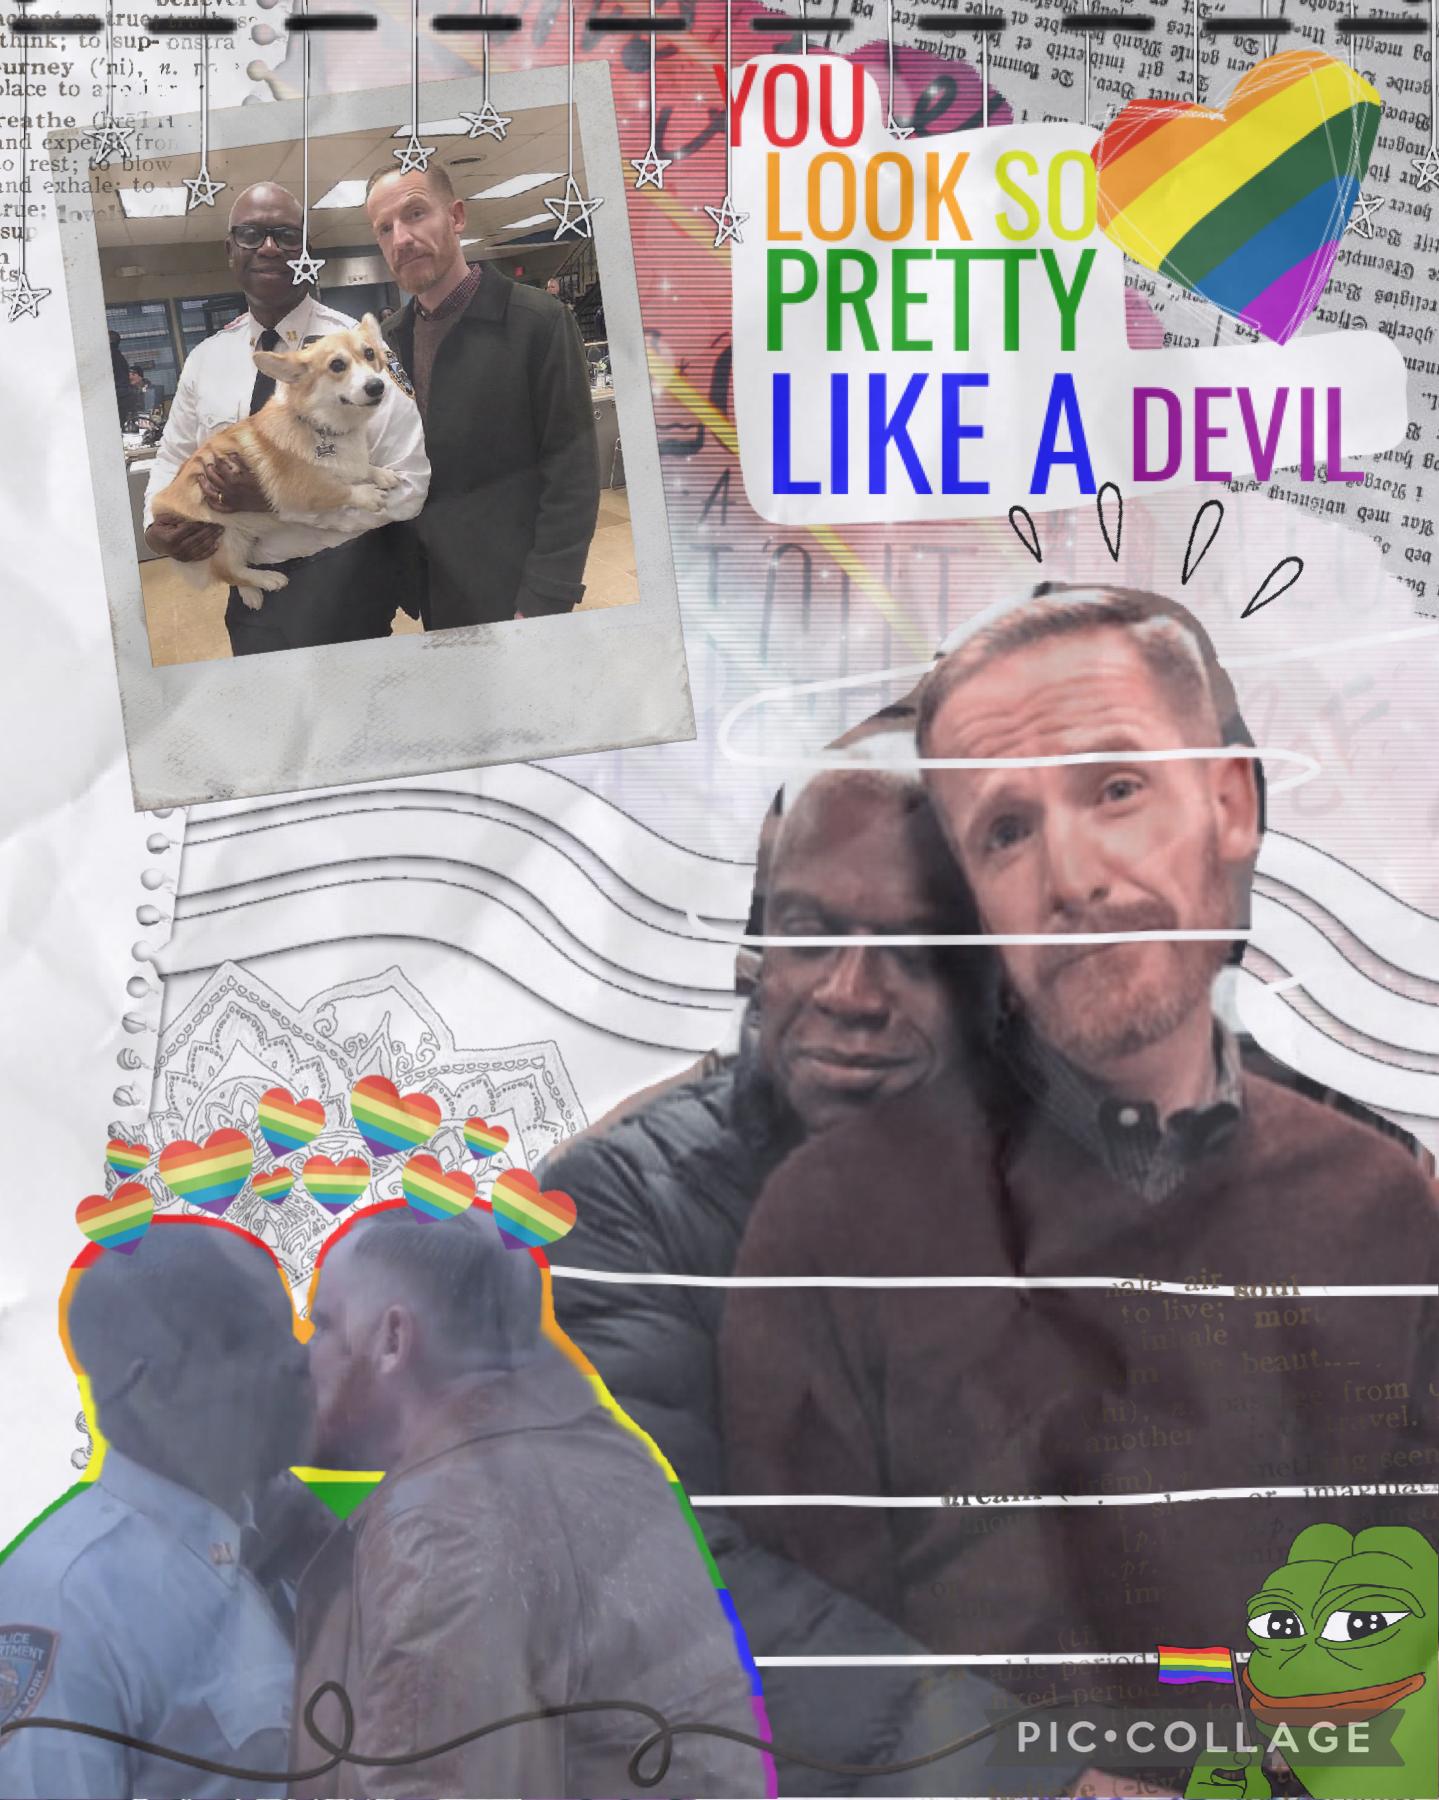 ❤️ TAP 🧡
💛 Brooklyn 99 aesthetic! 💚
💙 i used the Characters Kevin and Raymond bc they are husbands and i love them 😍 💜
❤️ i was gonna wait till pride month to post this but too late now! 🧡
💛 ilysm 💚
❤️🧡💛💚💙💜